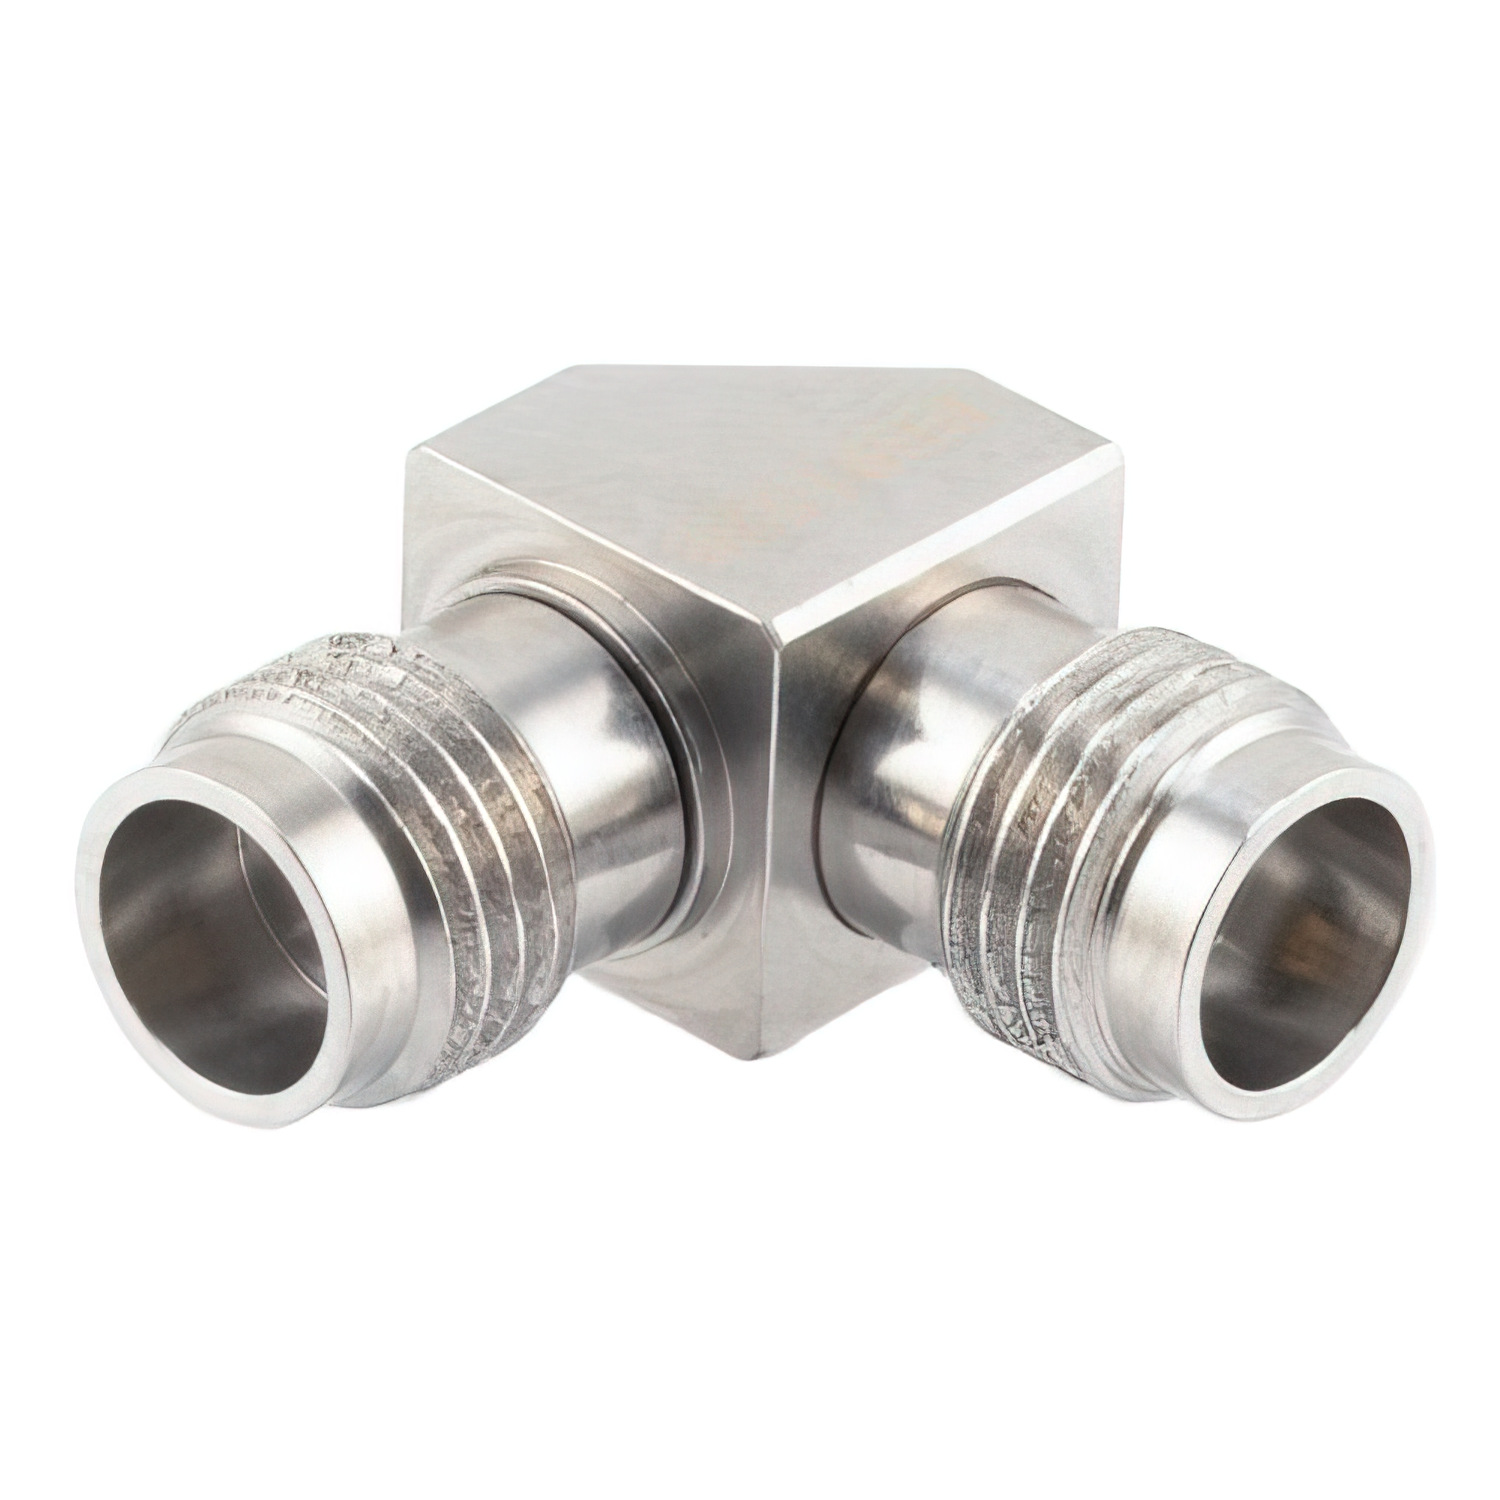 2.4mm Female to 2.4mm Female Miter Right Angle Adapter1